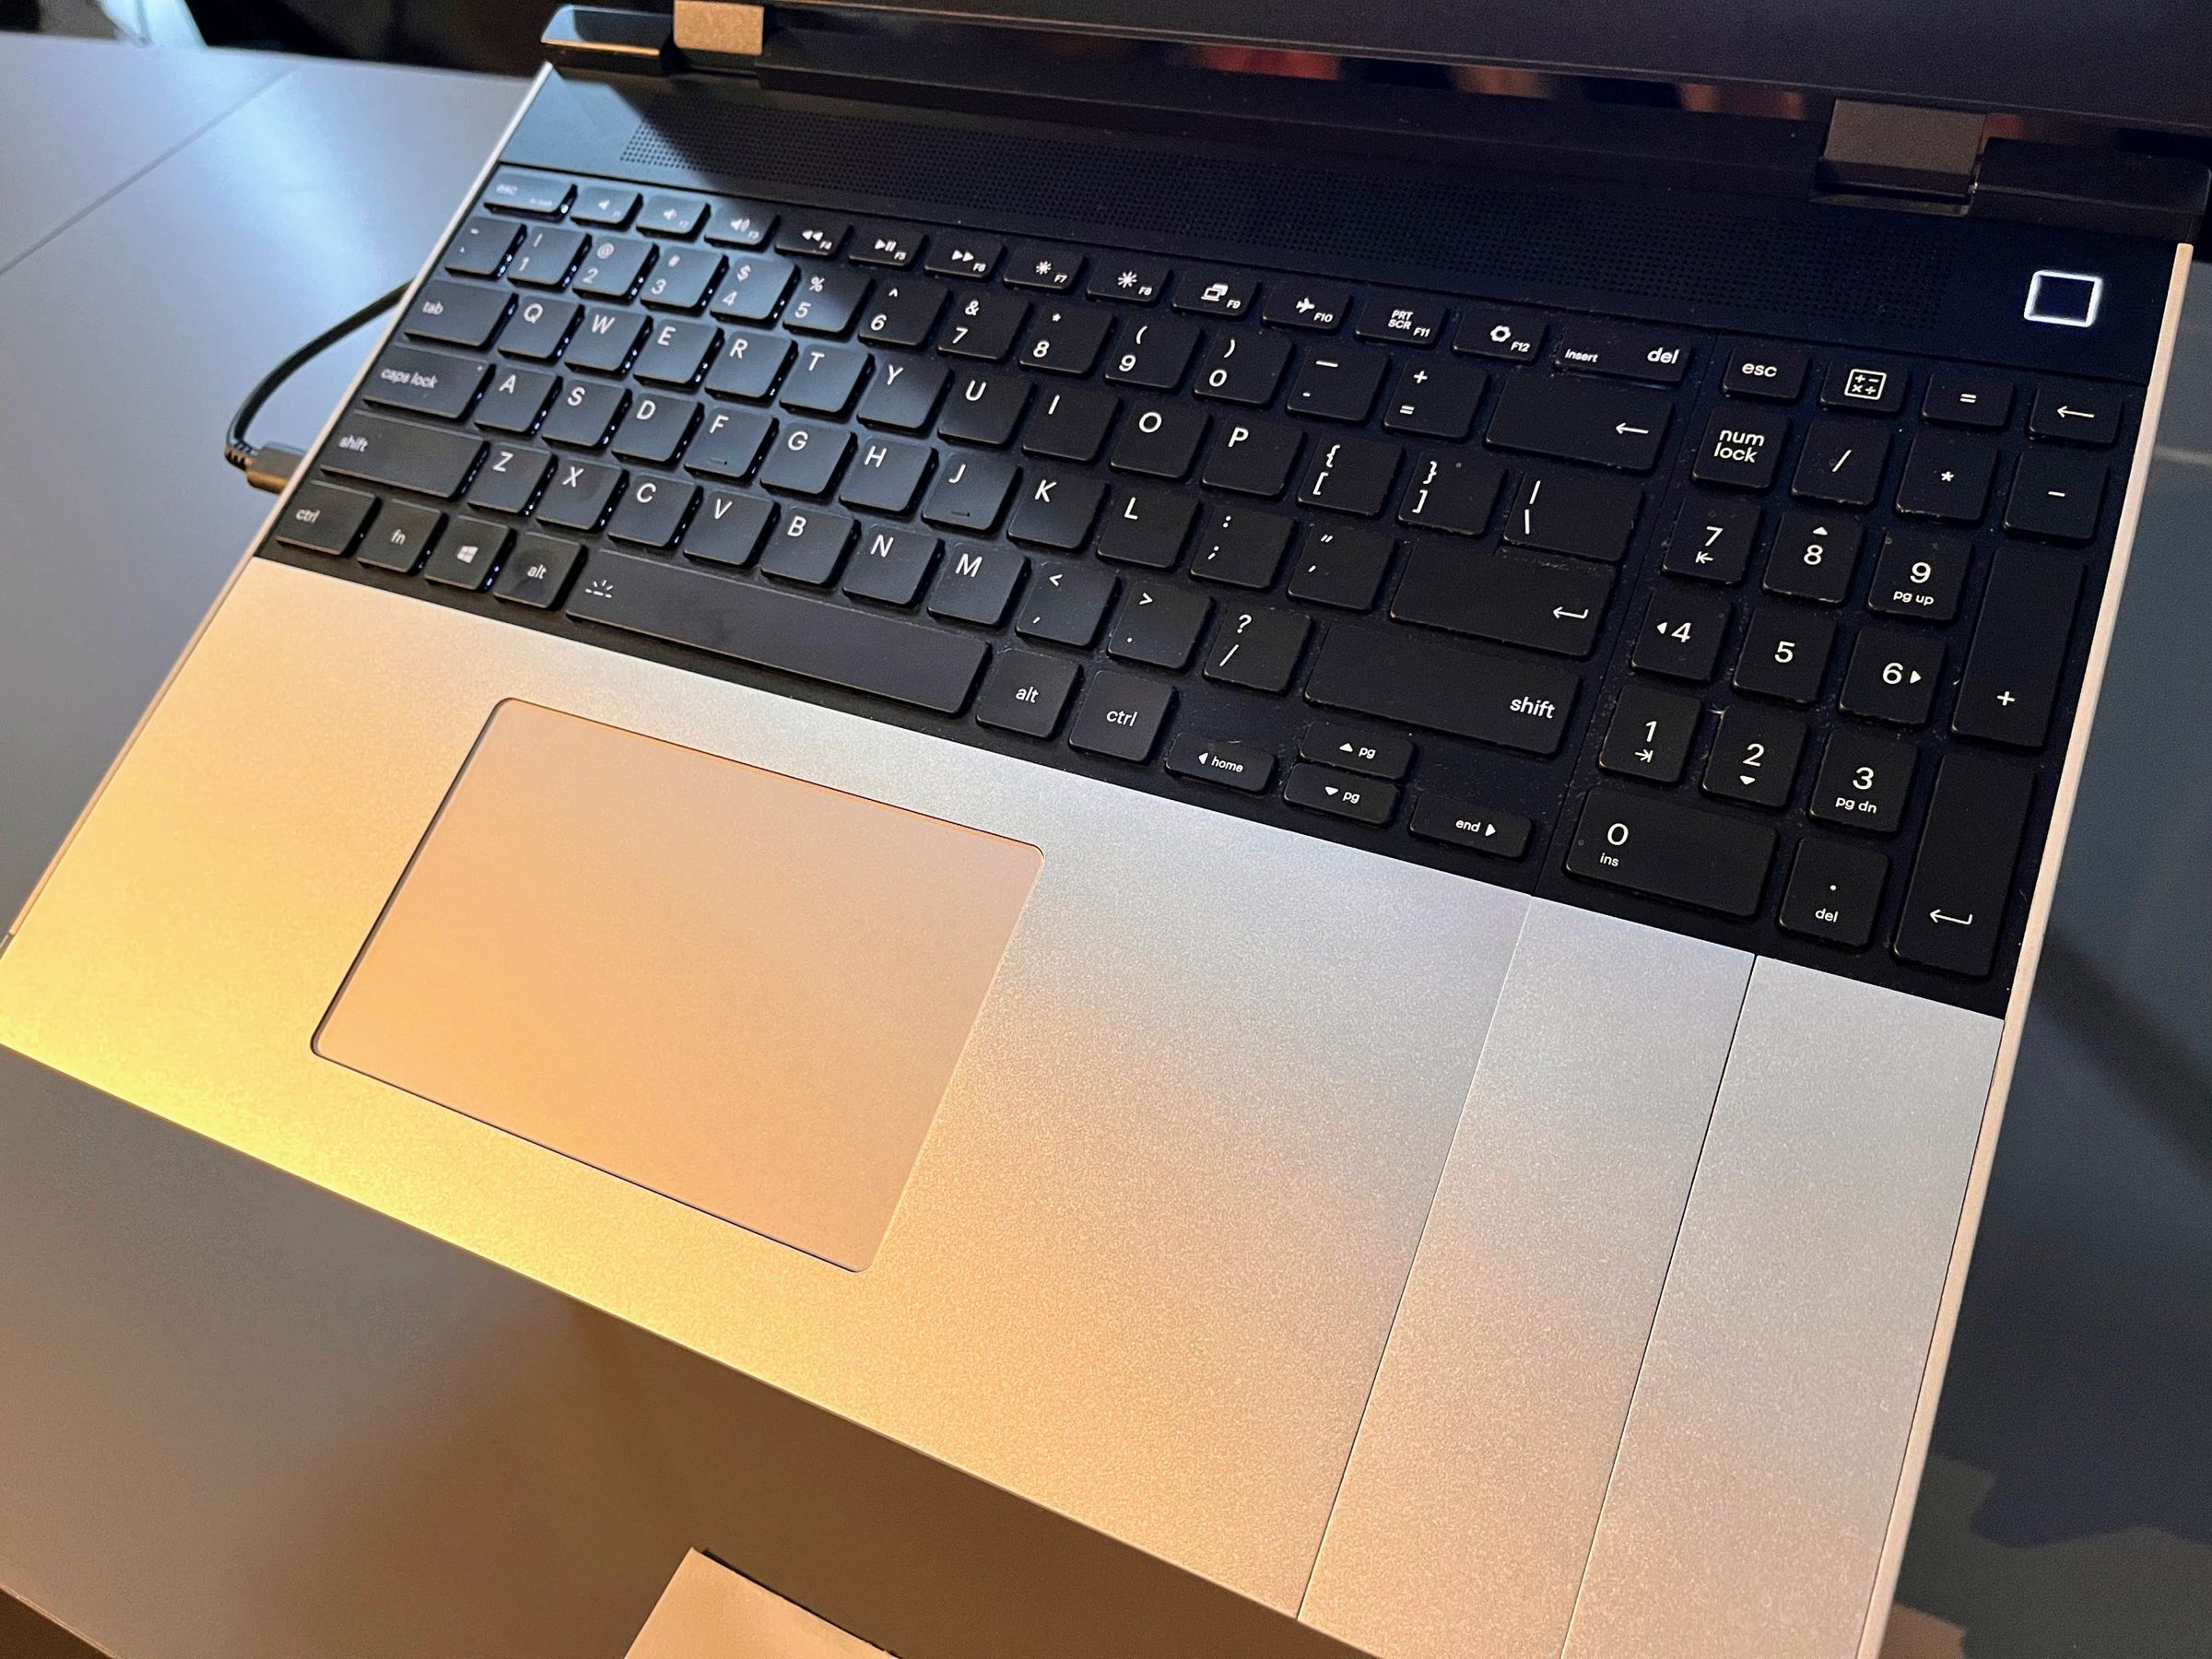 Here’s what the keyboard and touchpad look like left-aligned, with a numpad and spacers on the right.